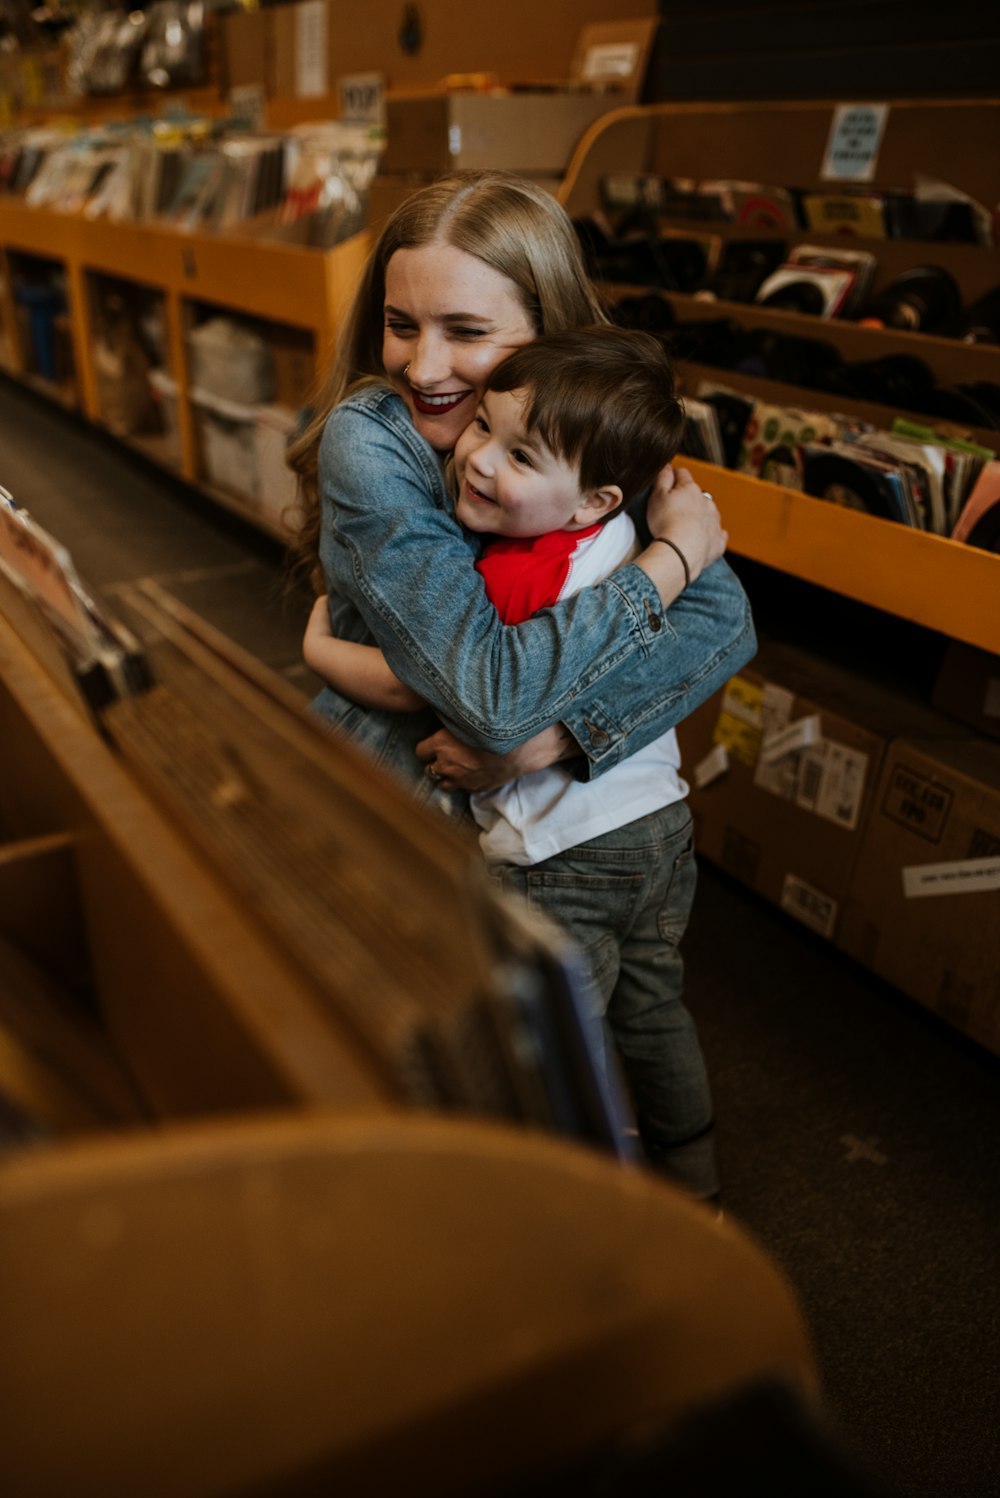 a woman hugging a child in a store